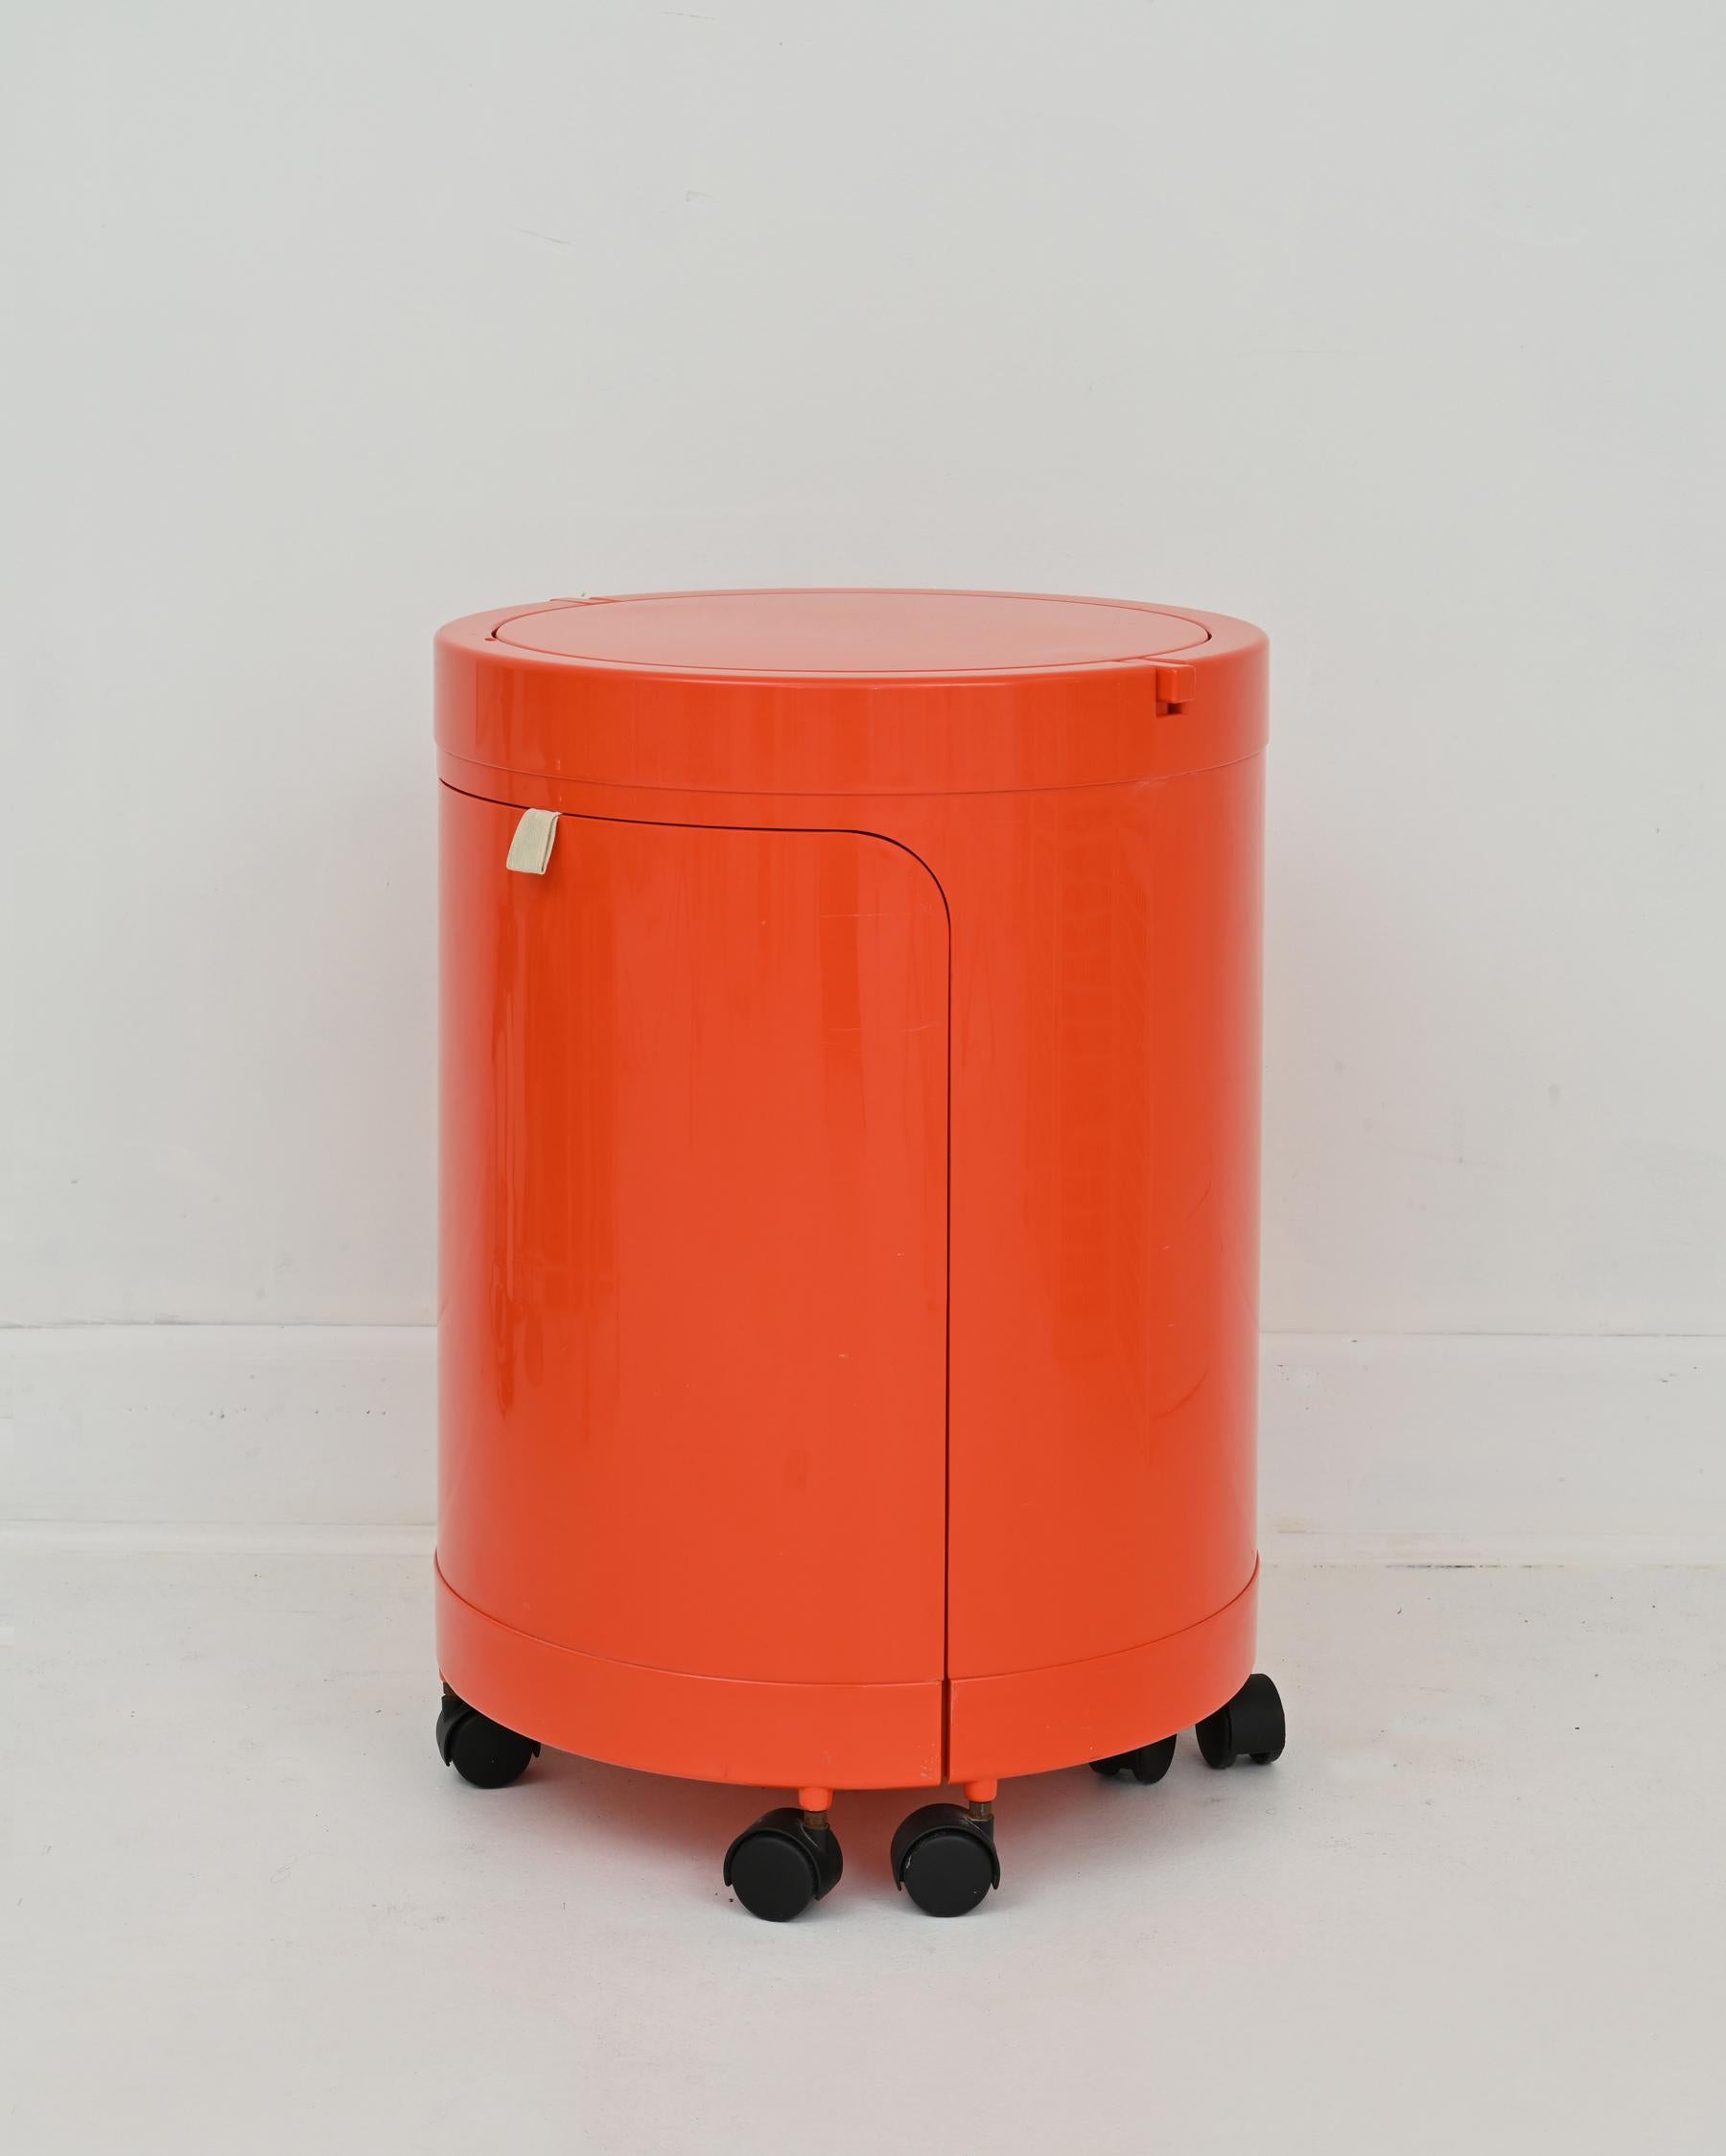 1970s rare atomic orange “Silvi” vanity mounted on wheels with pull-out chair and adjustable mirror. Plastic produced by the firm Studio Kastilia and constructed by Fanini Fain S.P.A. of Ascoli Piceno. Made in Italy. The chair fits perfectly inside